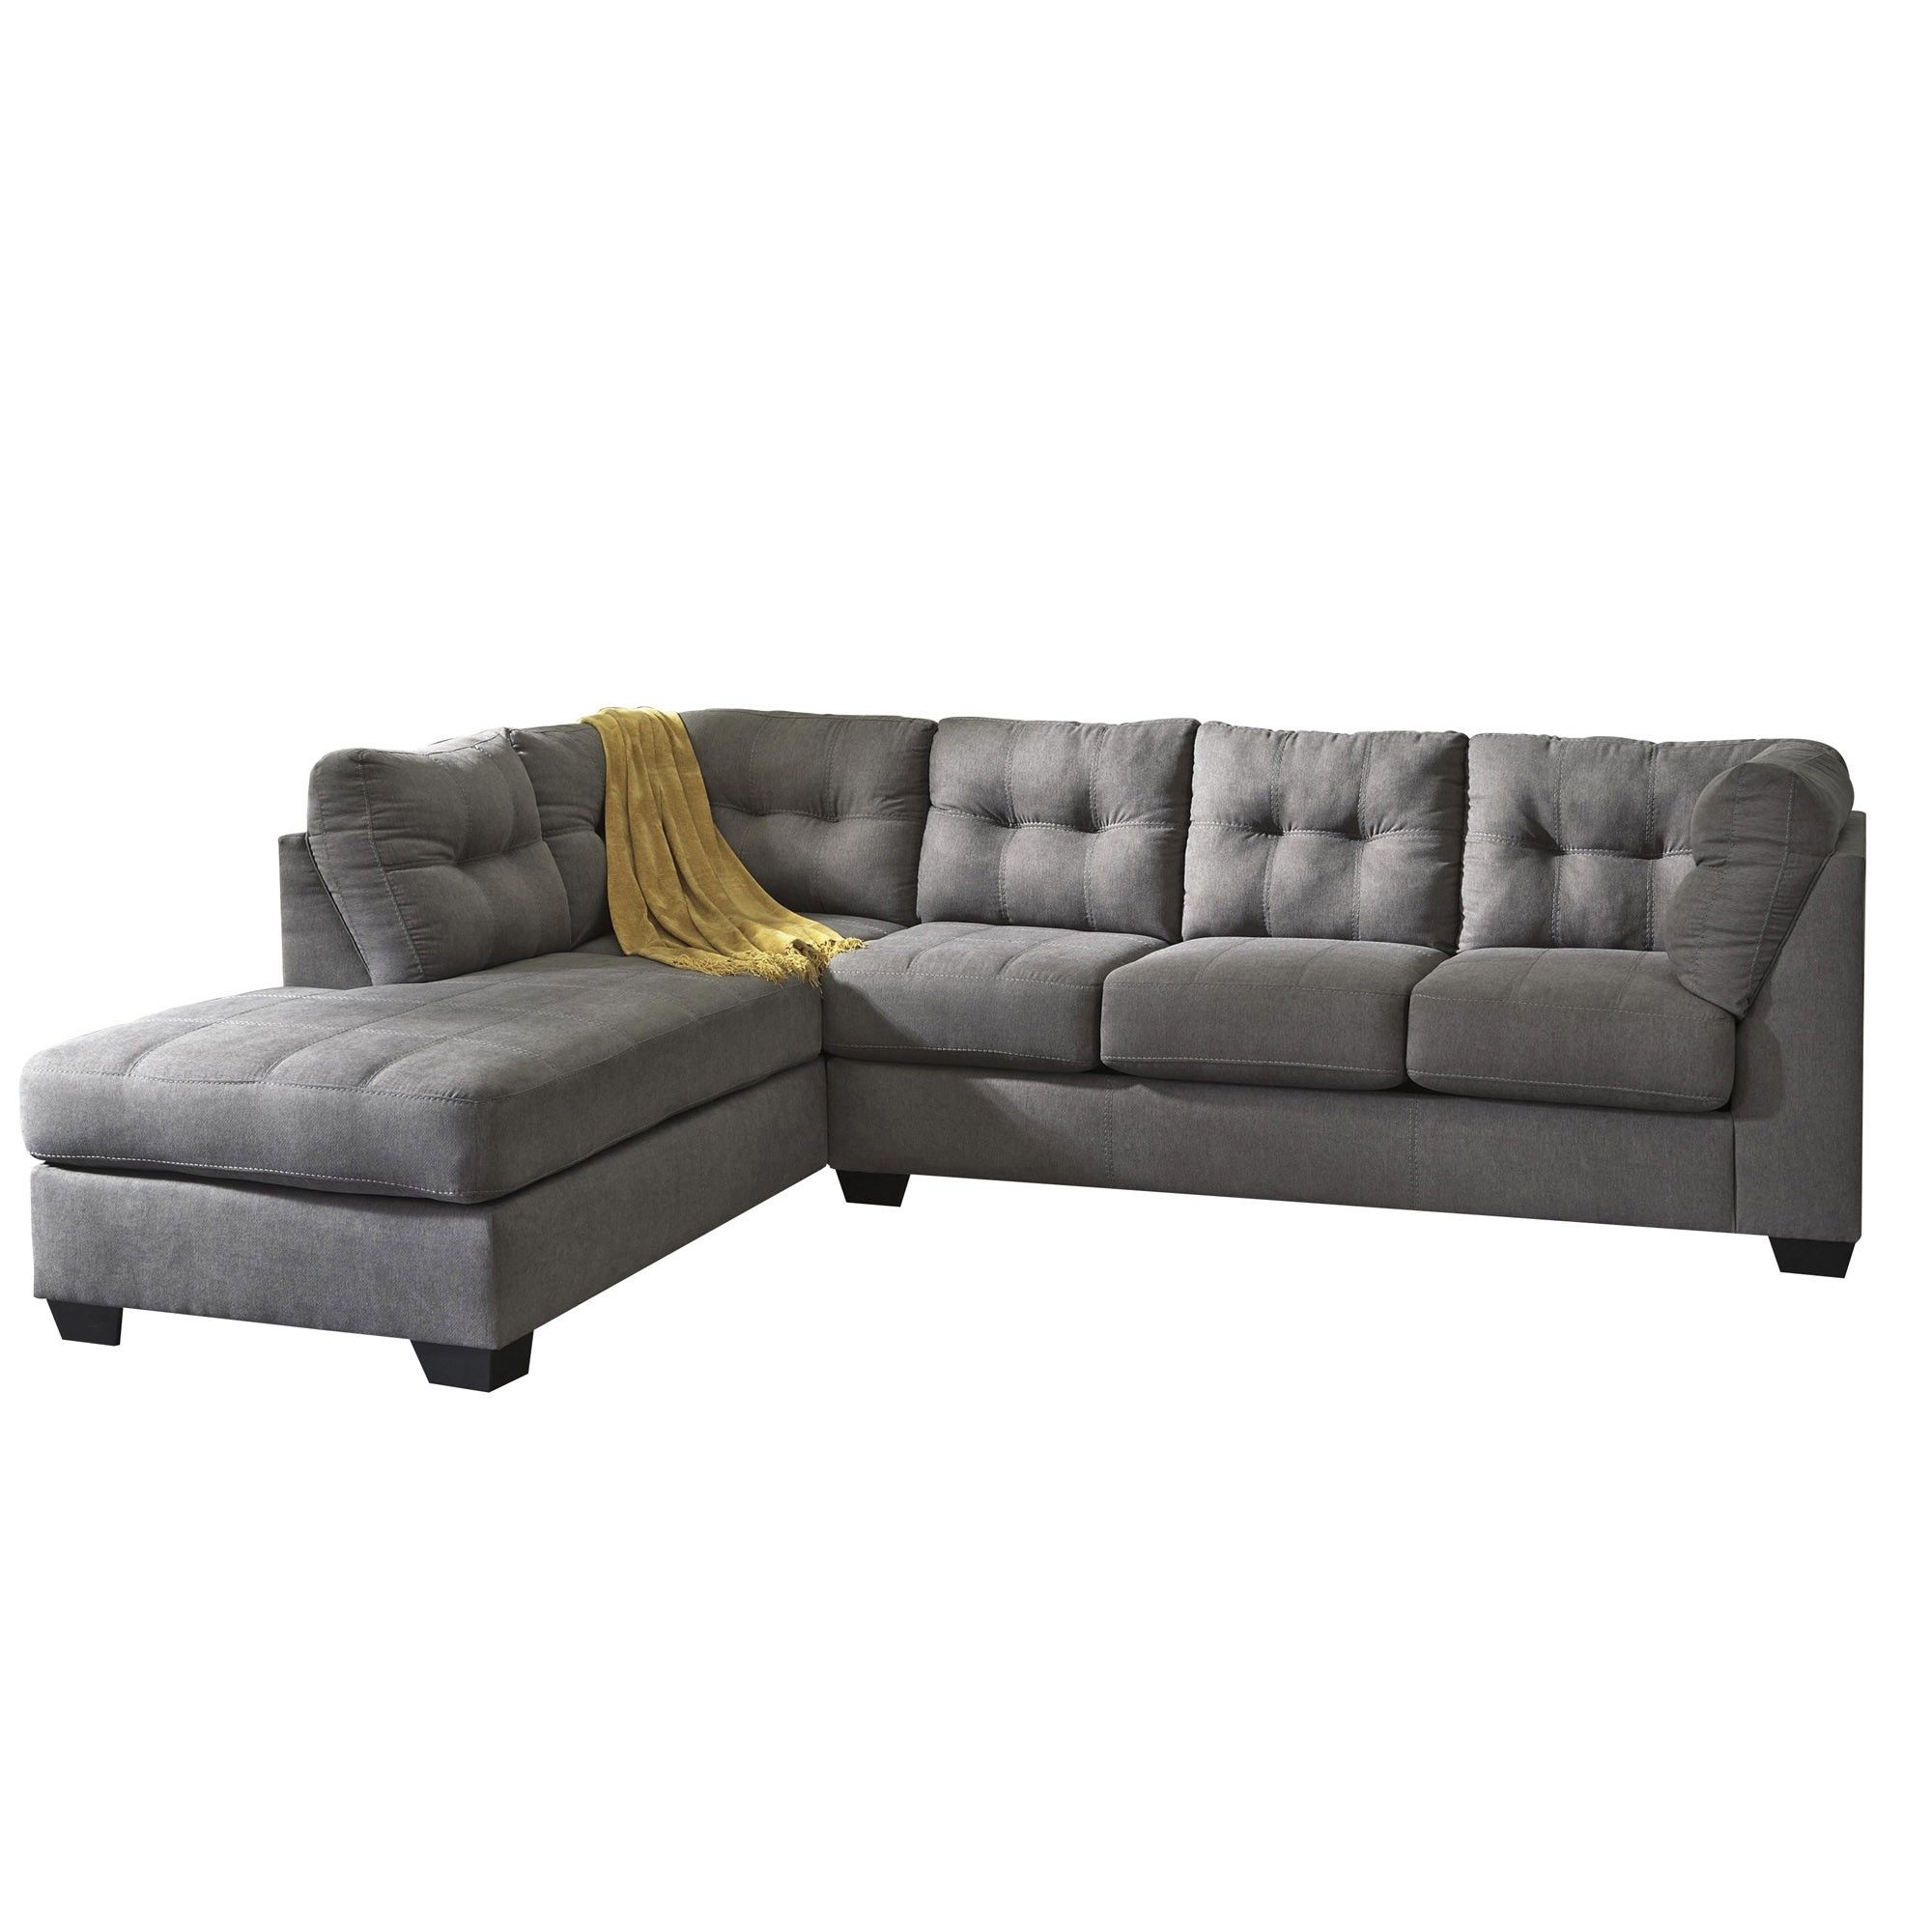 Maier 2 Piece Sectional | Tepperman's Throughout Teppermans Sectional Sofas (Photo 6 of 10)